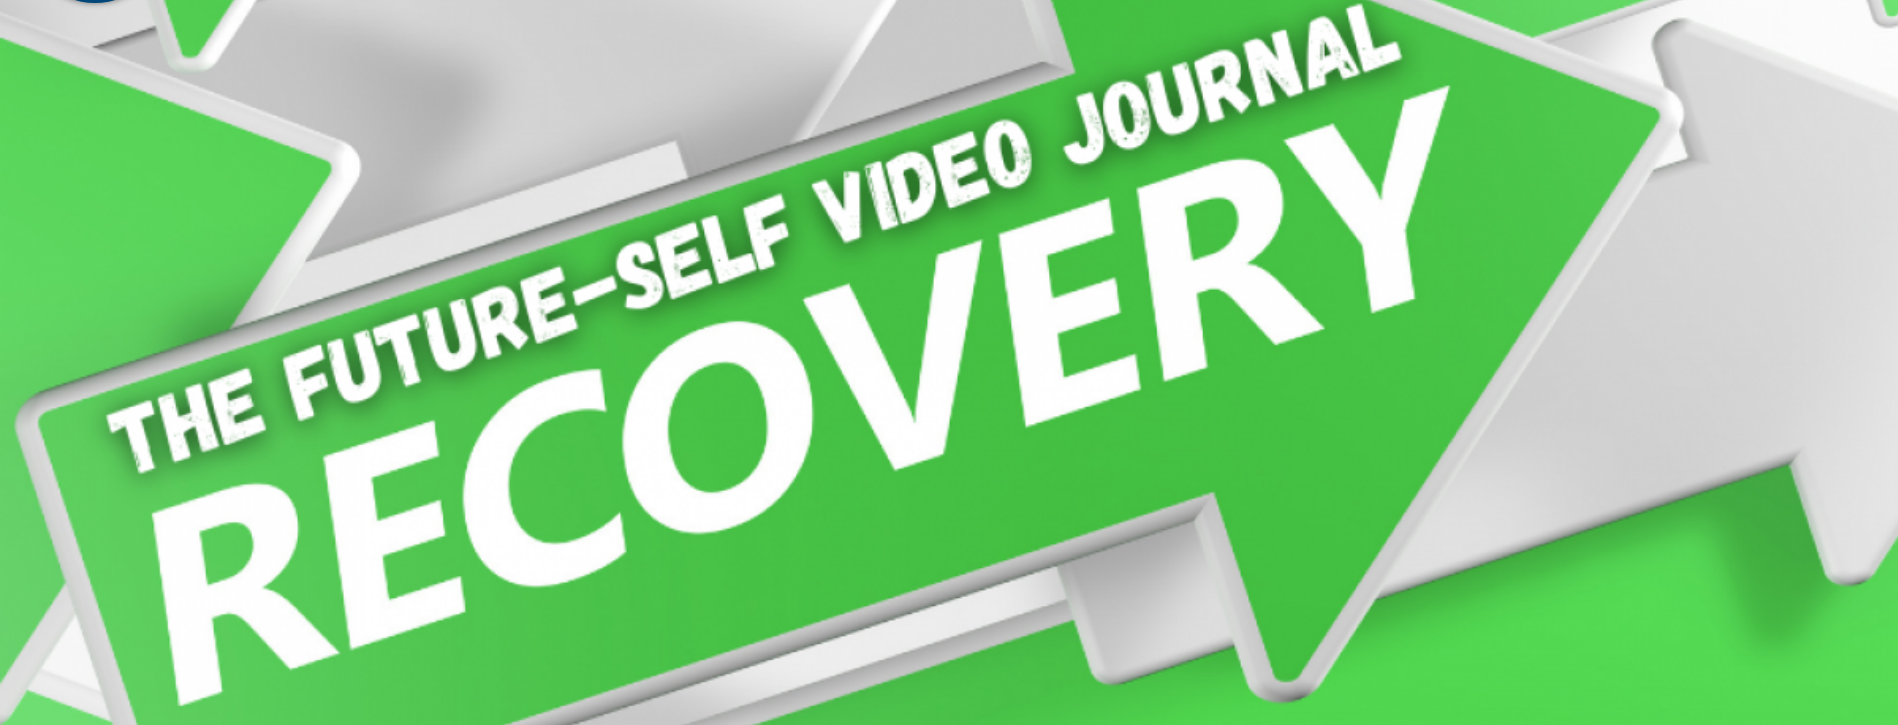 The Future-Self Video Journal For Goal Re-commitment In Recovery 